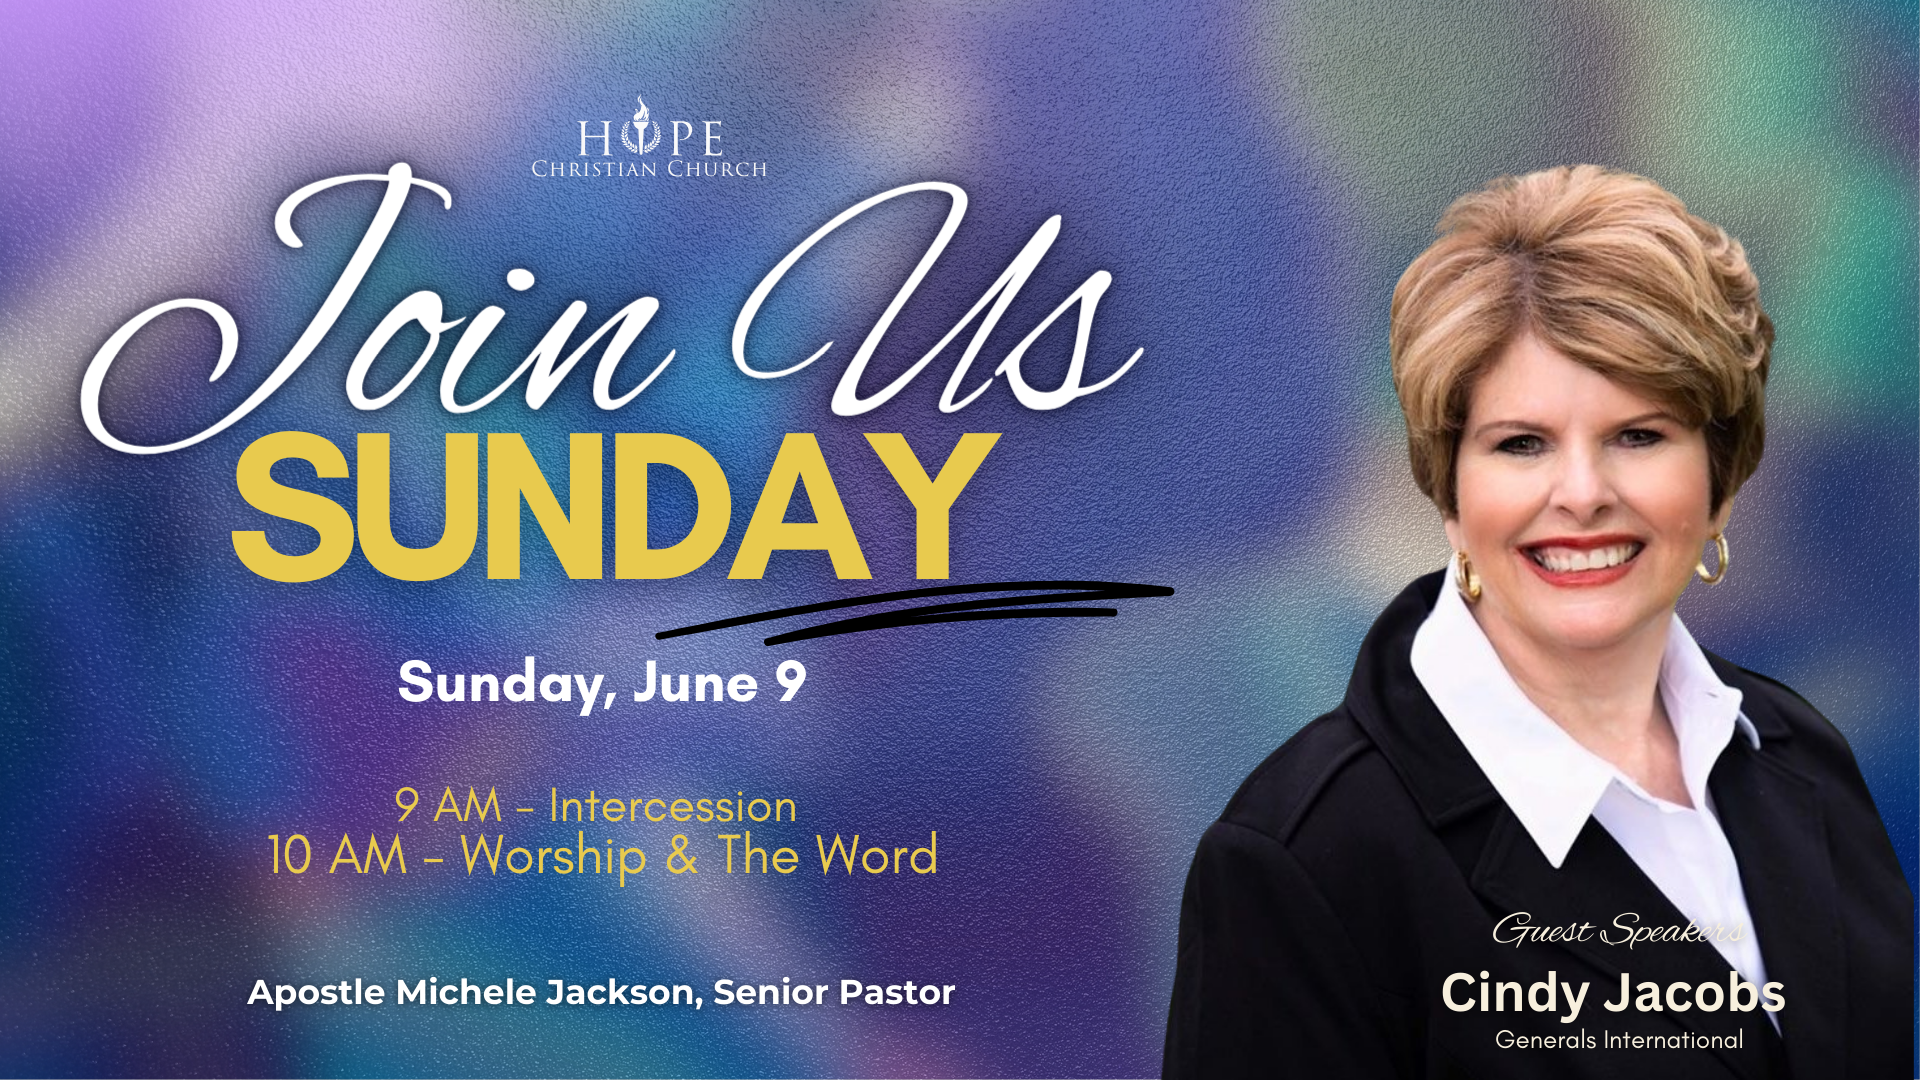 Cindy Jacobs | Sunday Worship Experience

June 9 | 10am
